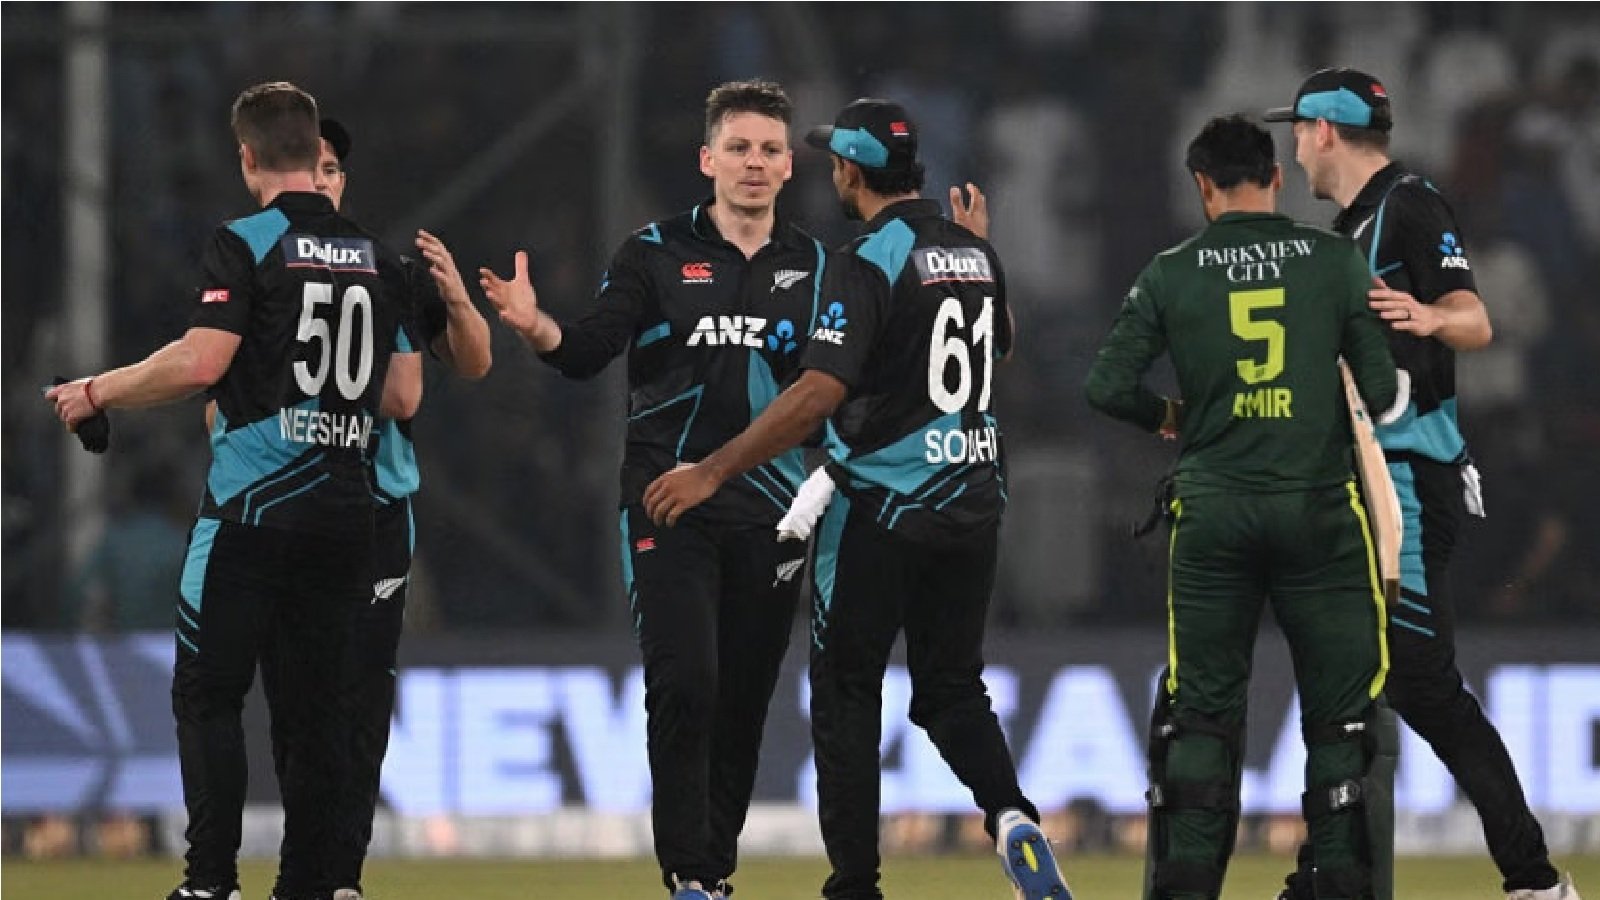 Clinical New Zealand outlast Pakistan to win 4th T20I